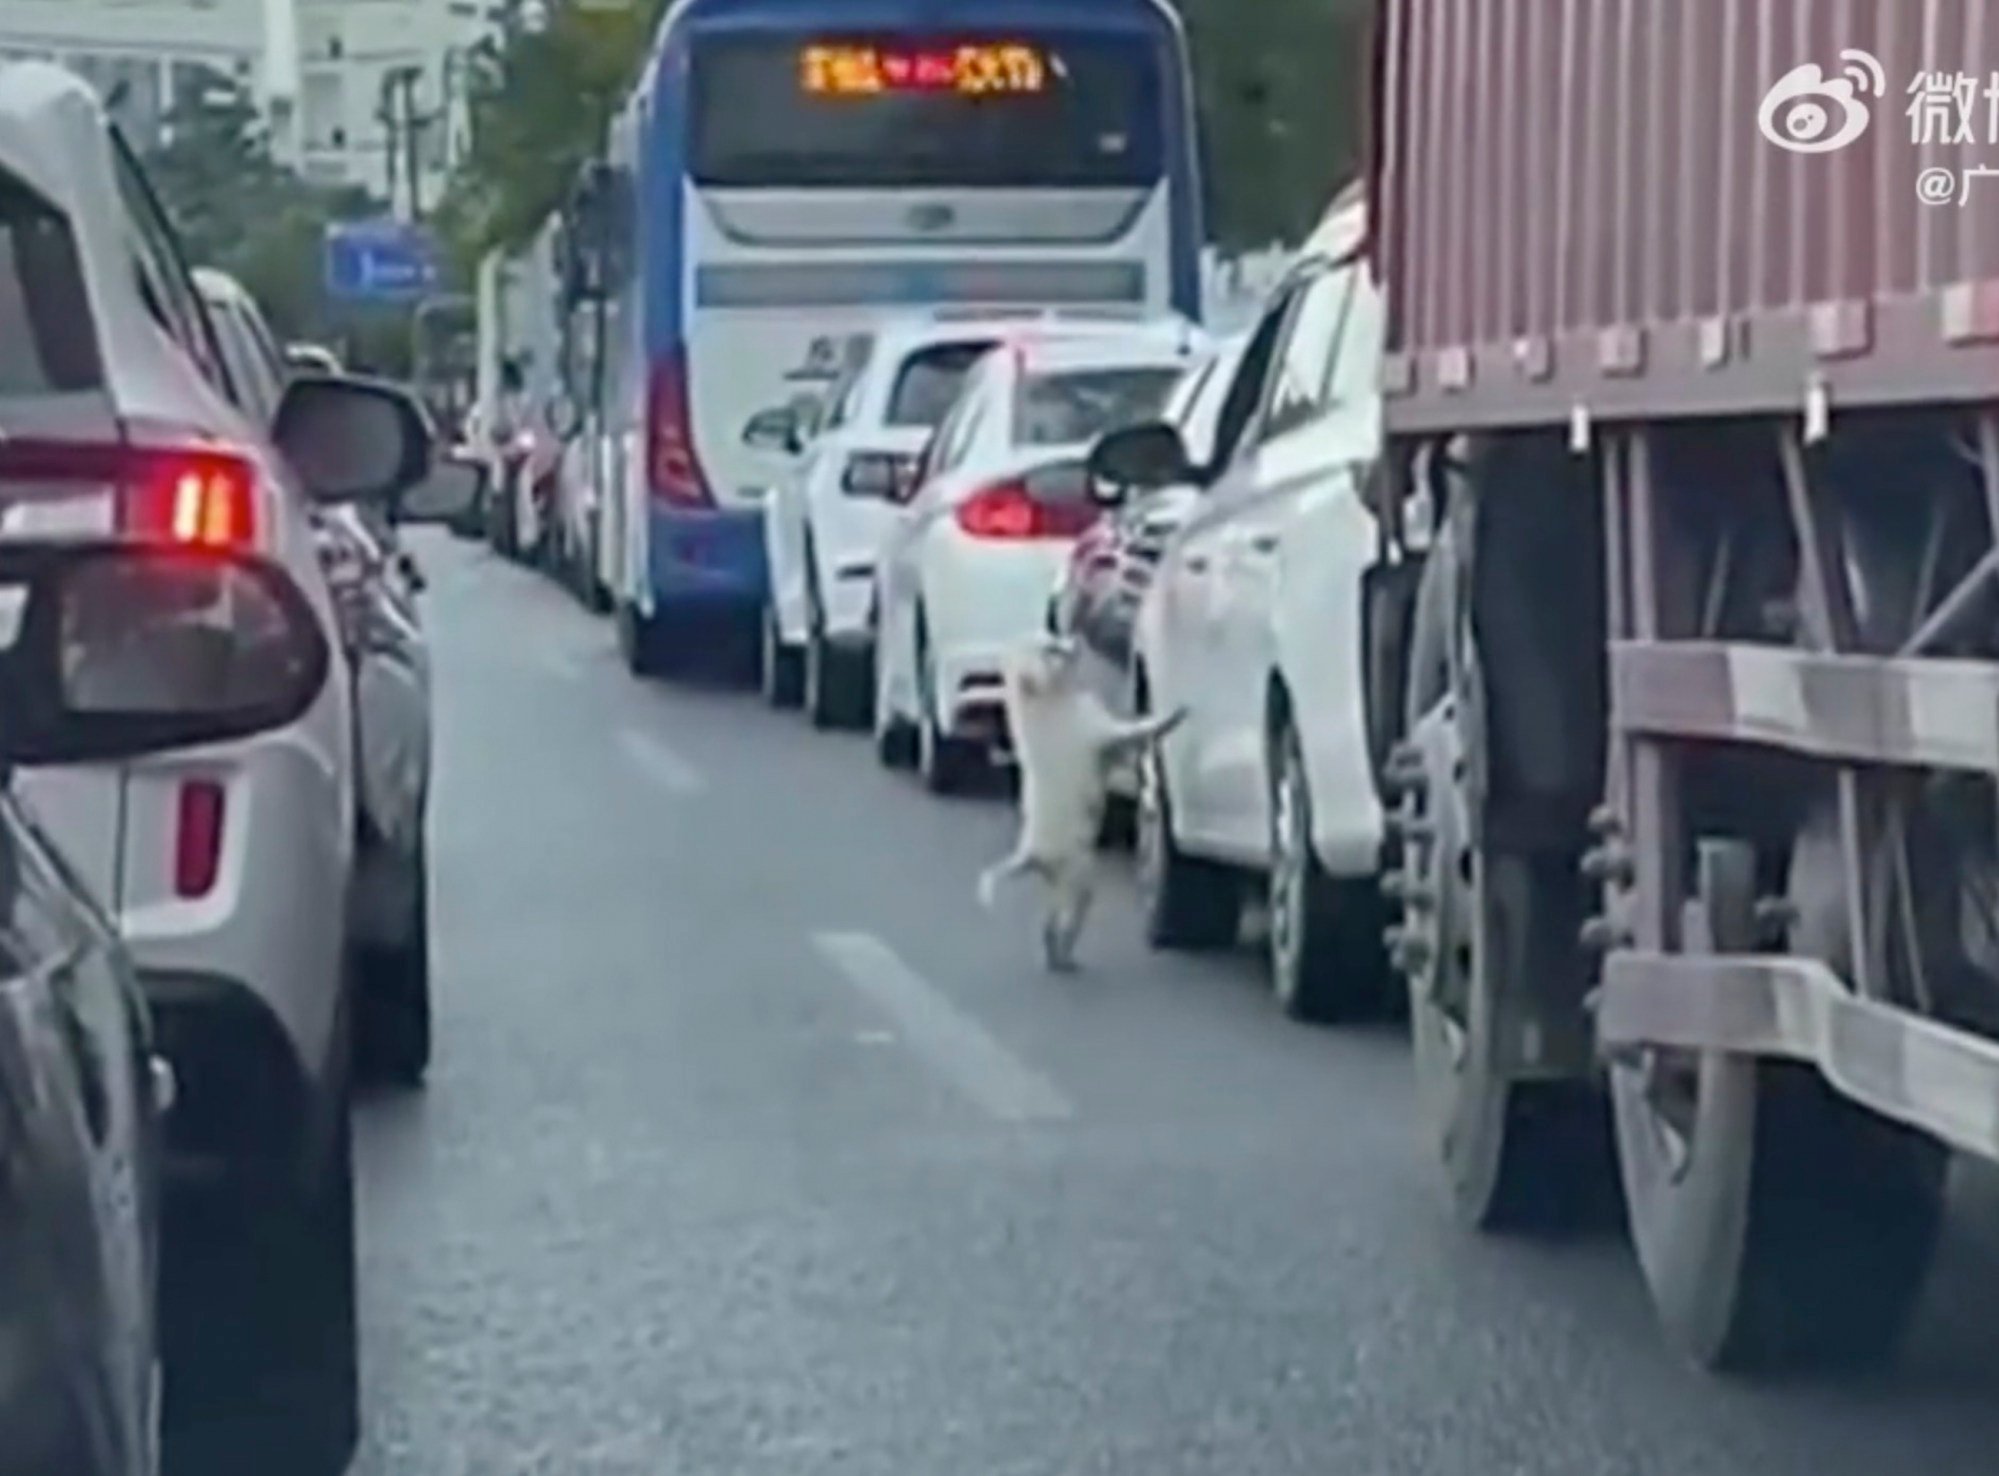 The puppy tries to get back into the vehicle after being dumped onto the road. Photo: Weibo